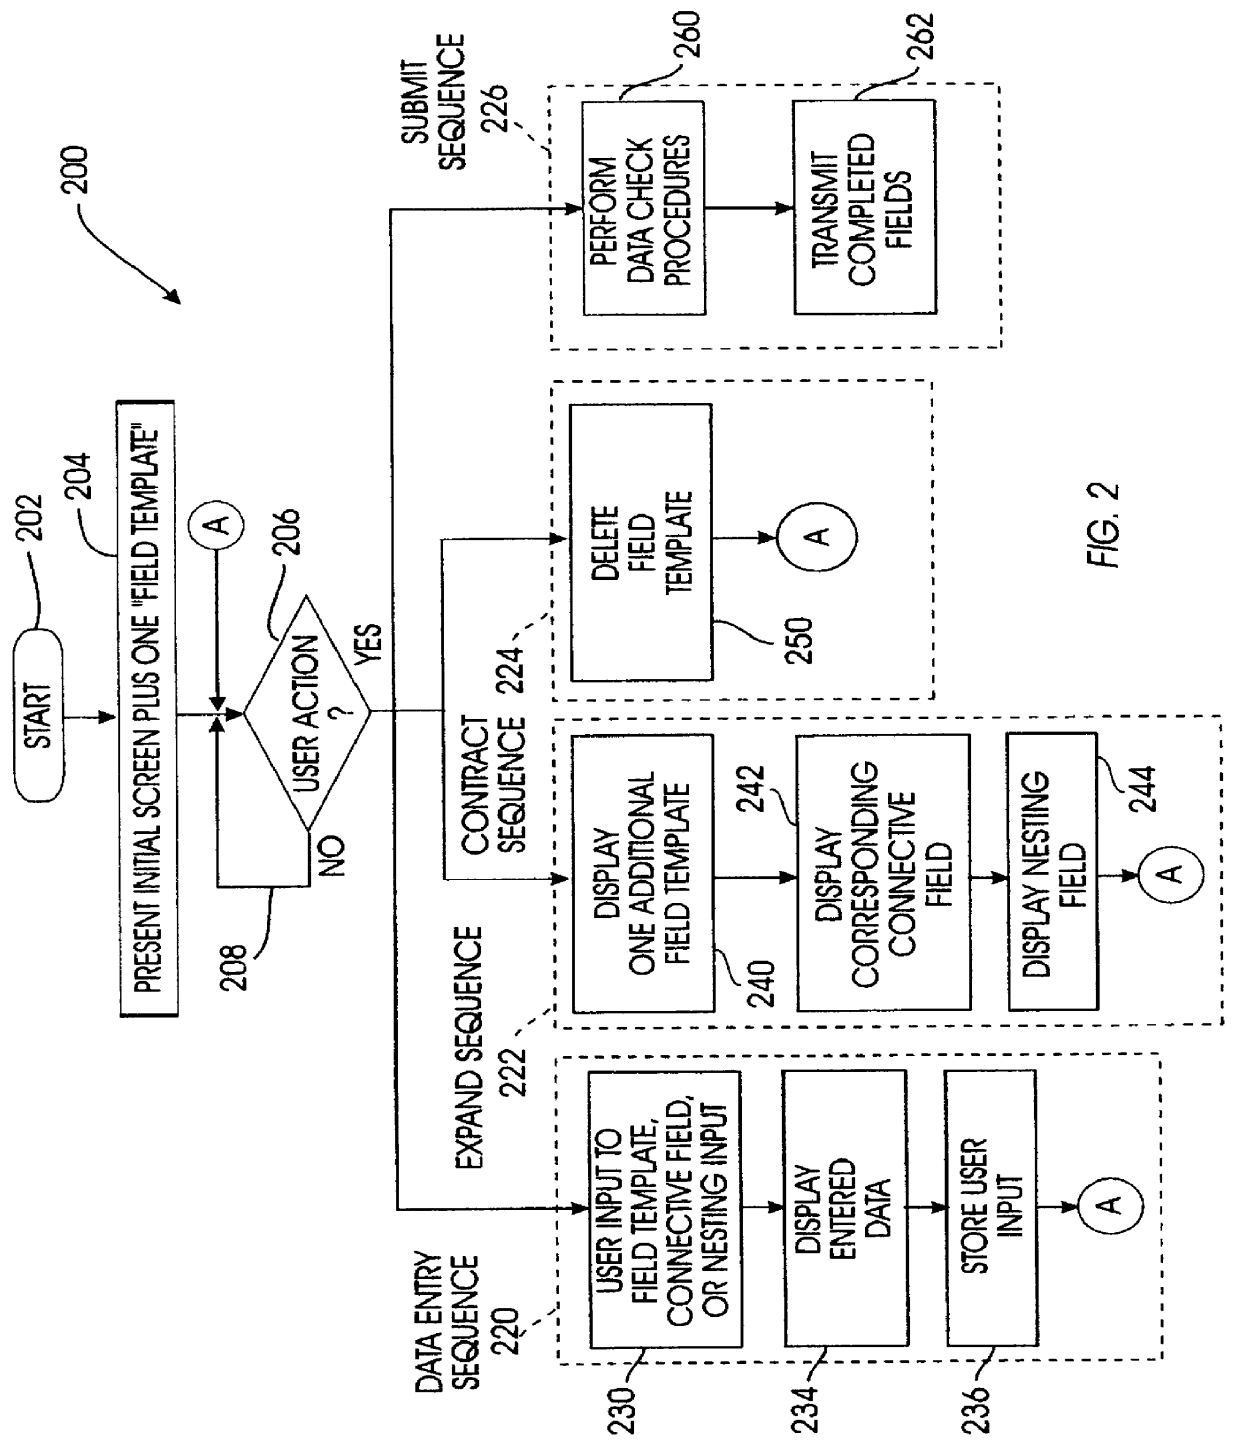 System for creating structured fields on electronic forms